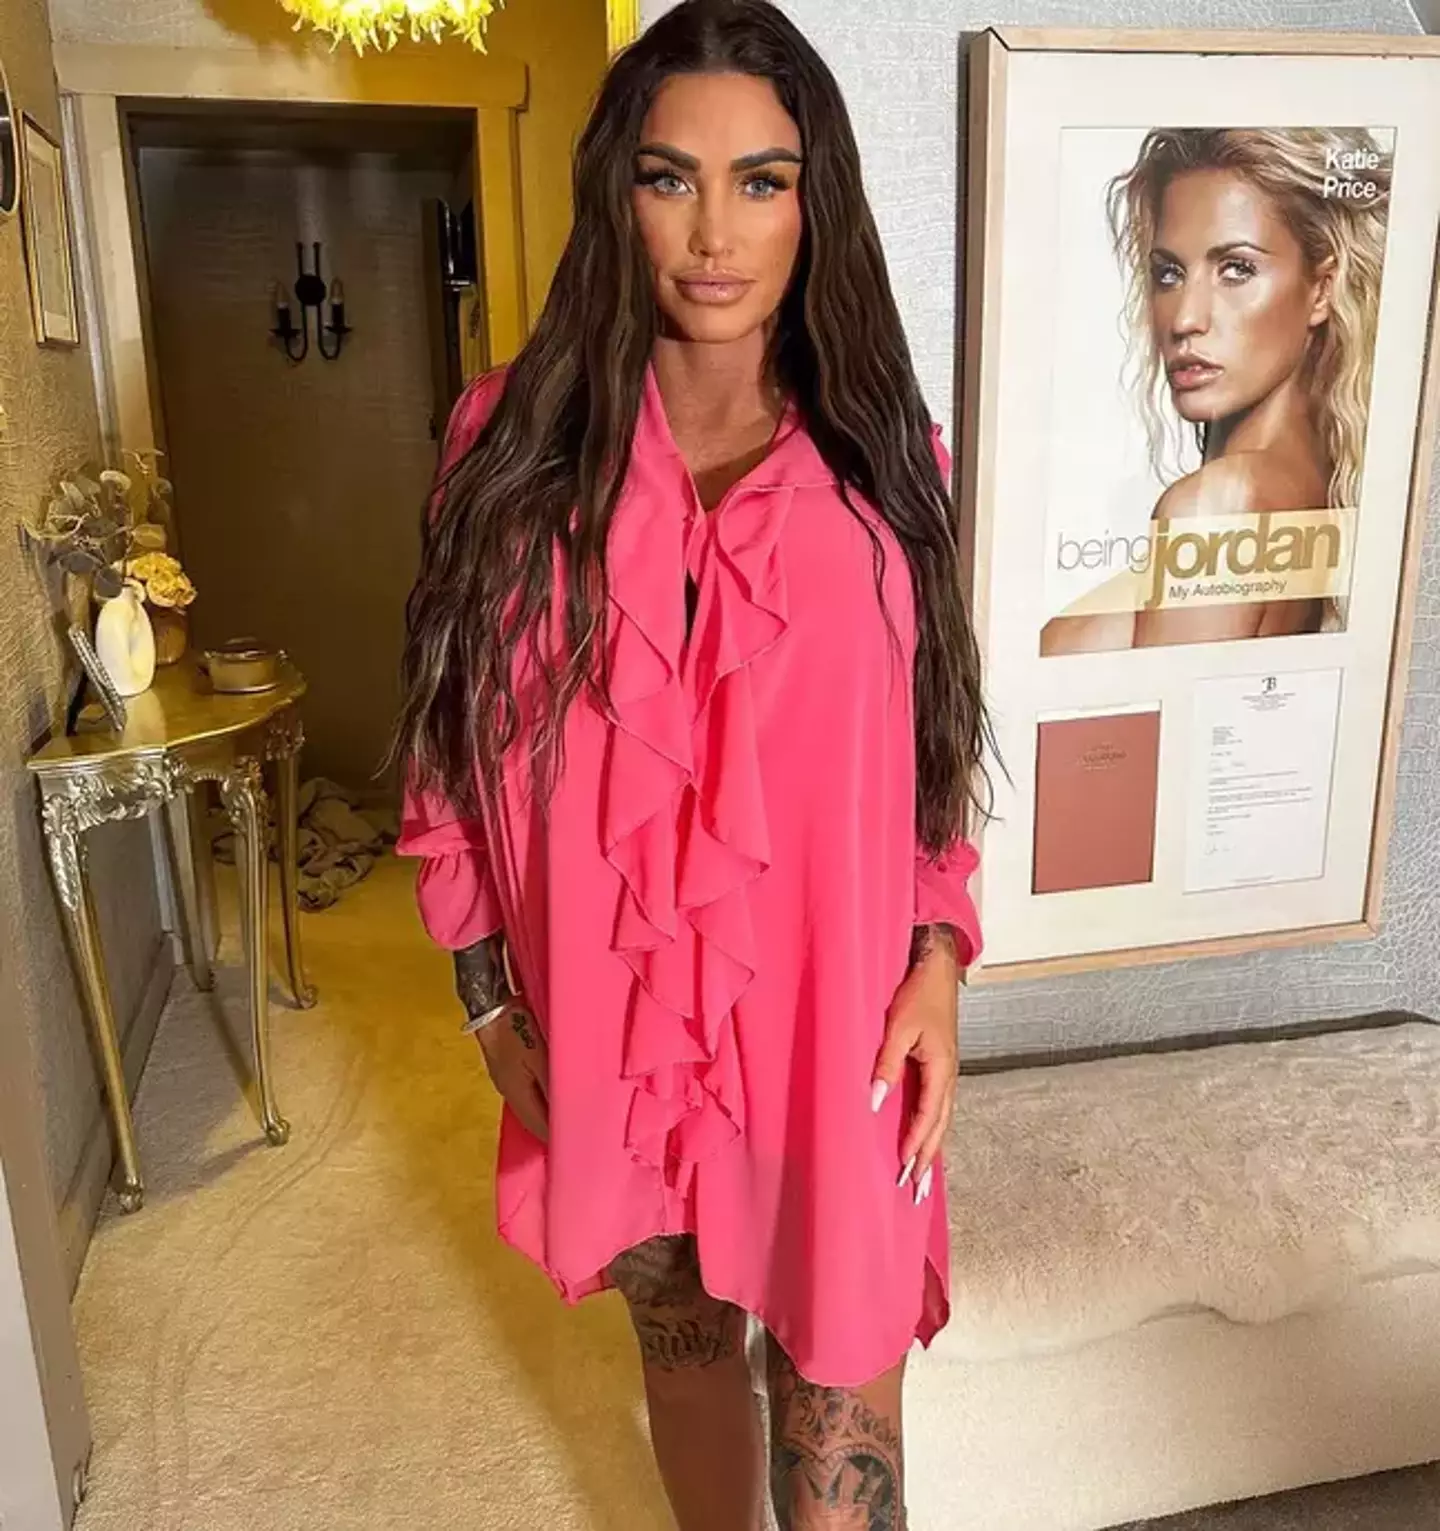 Katie Price could face another driving ban after she was reportedly pulled over by police on Friday (21 July).